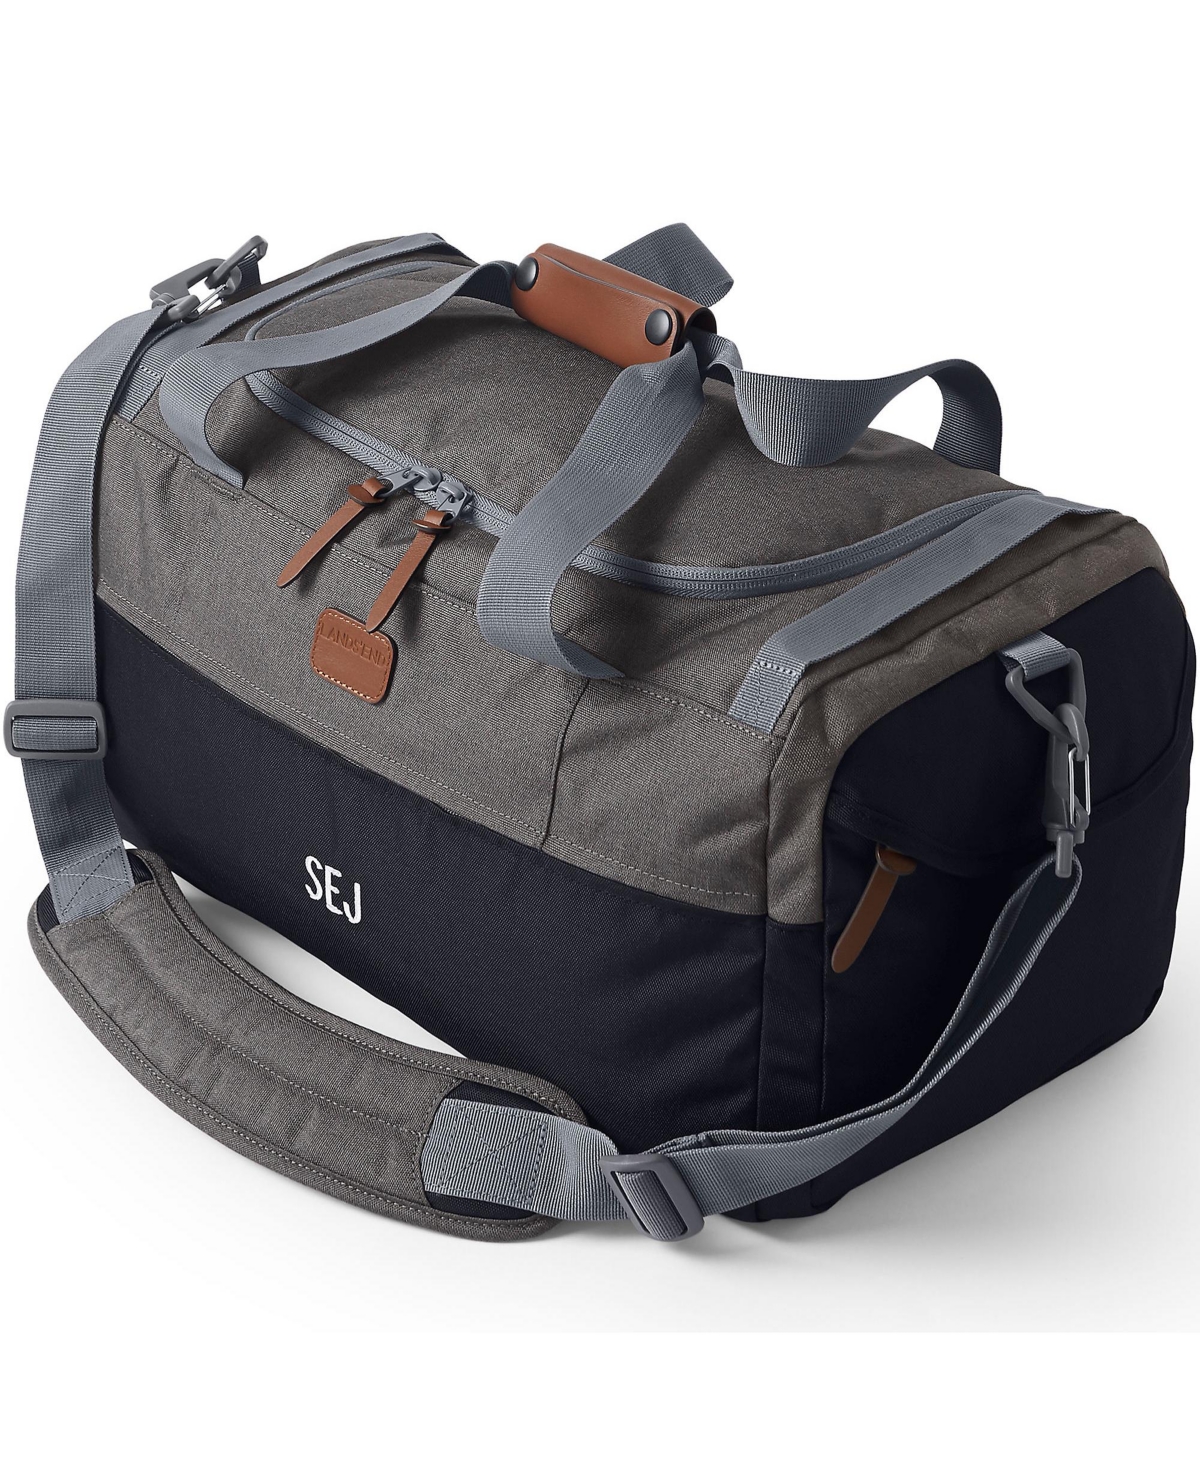 Small All Purpose Travel Duffle Bag - Oxidized gray heather